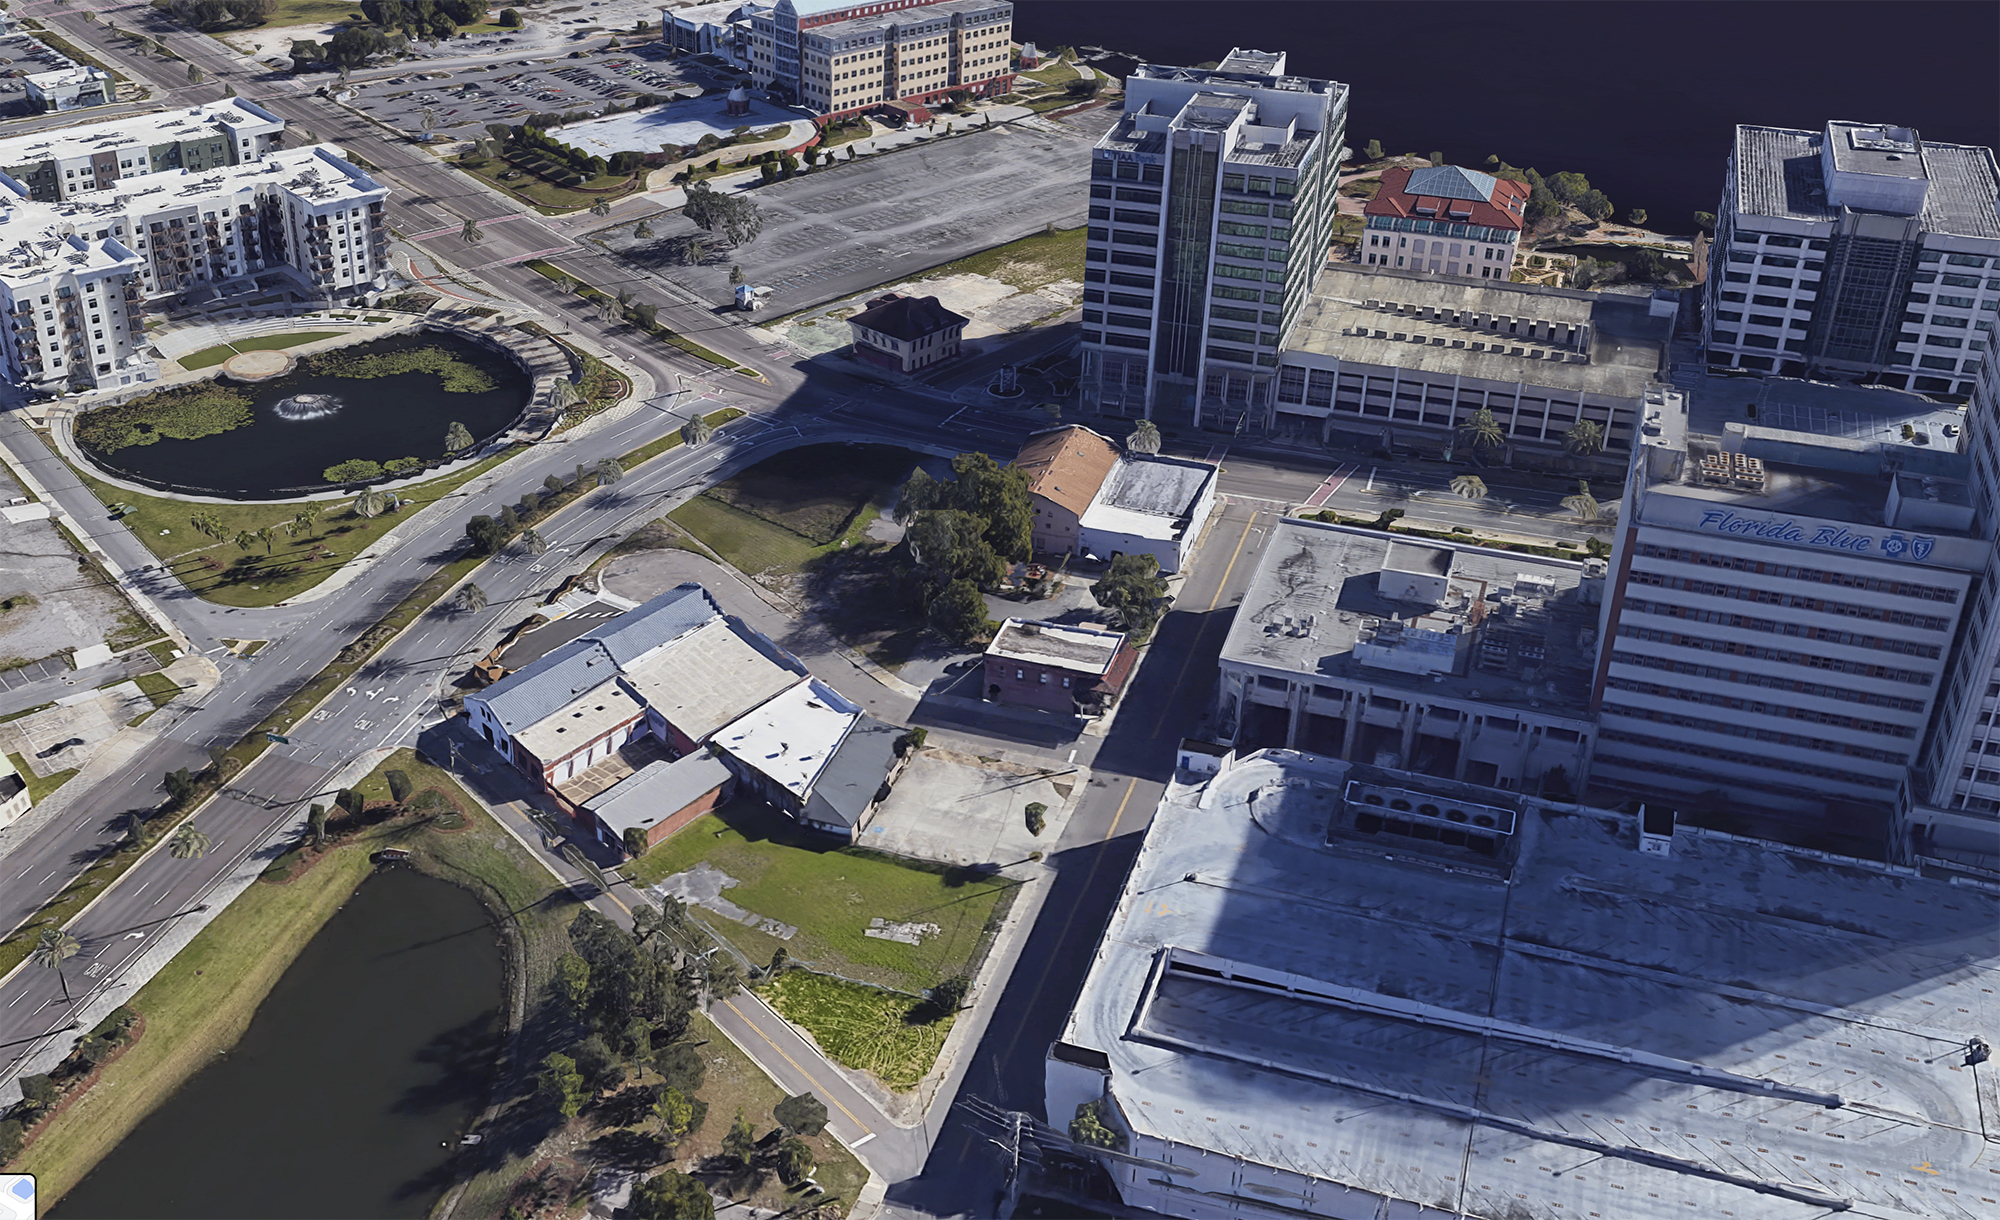 An aerial view of the Edison Building, at center with awning. (Google)